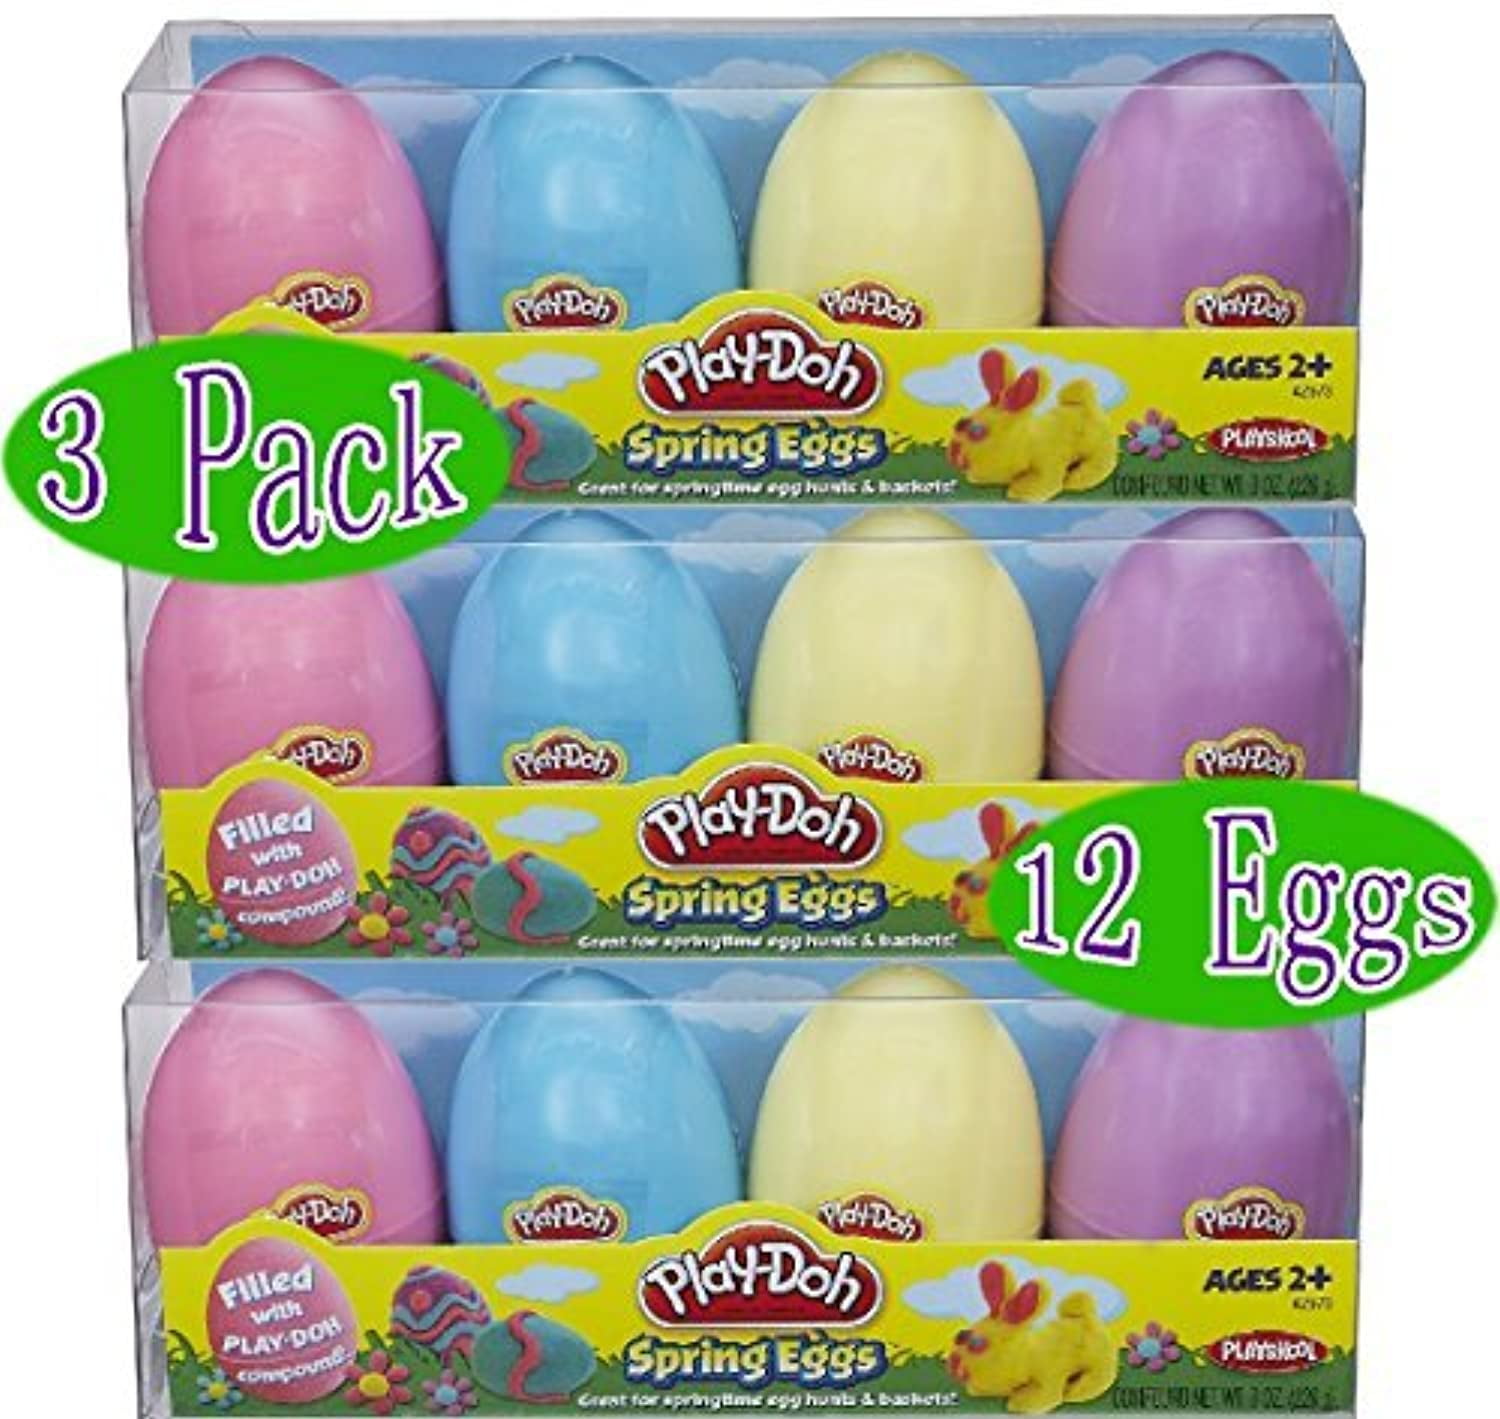 4 Play Doh Easter Egg Hunt Eggs 10 Per Pack Filled With Play Doh Fun Details about   